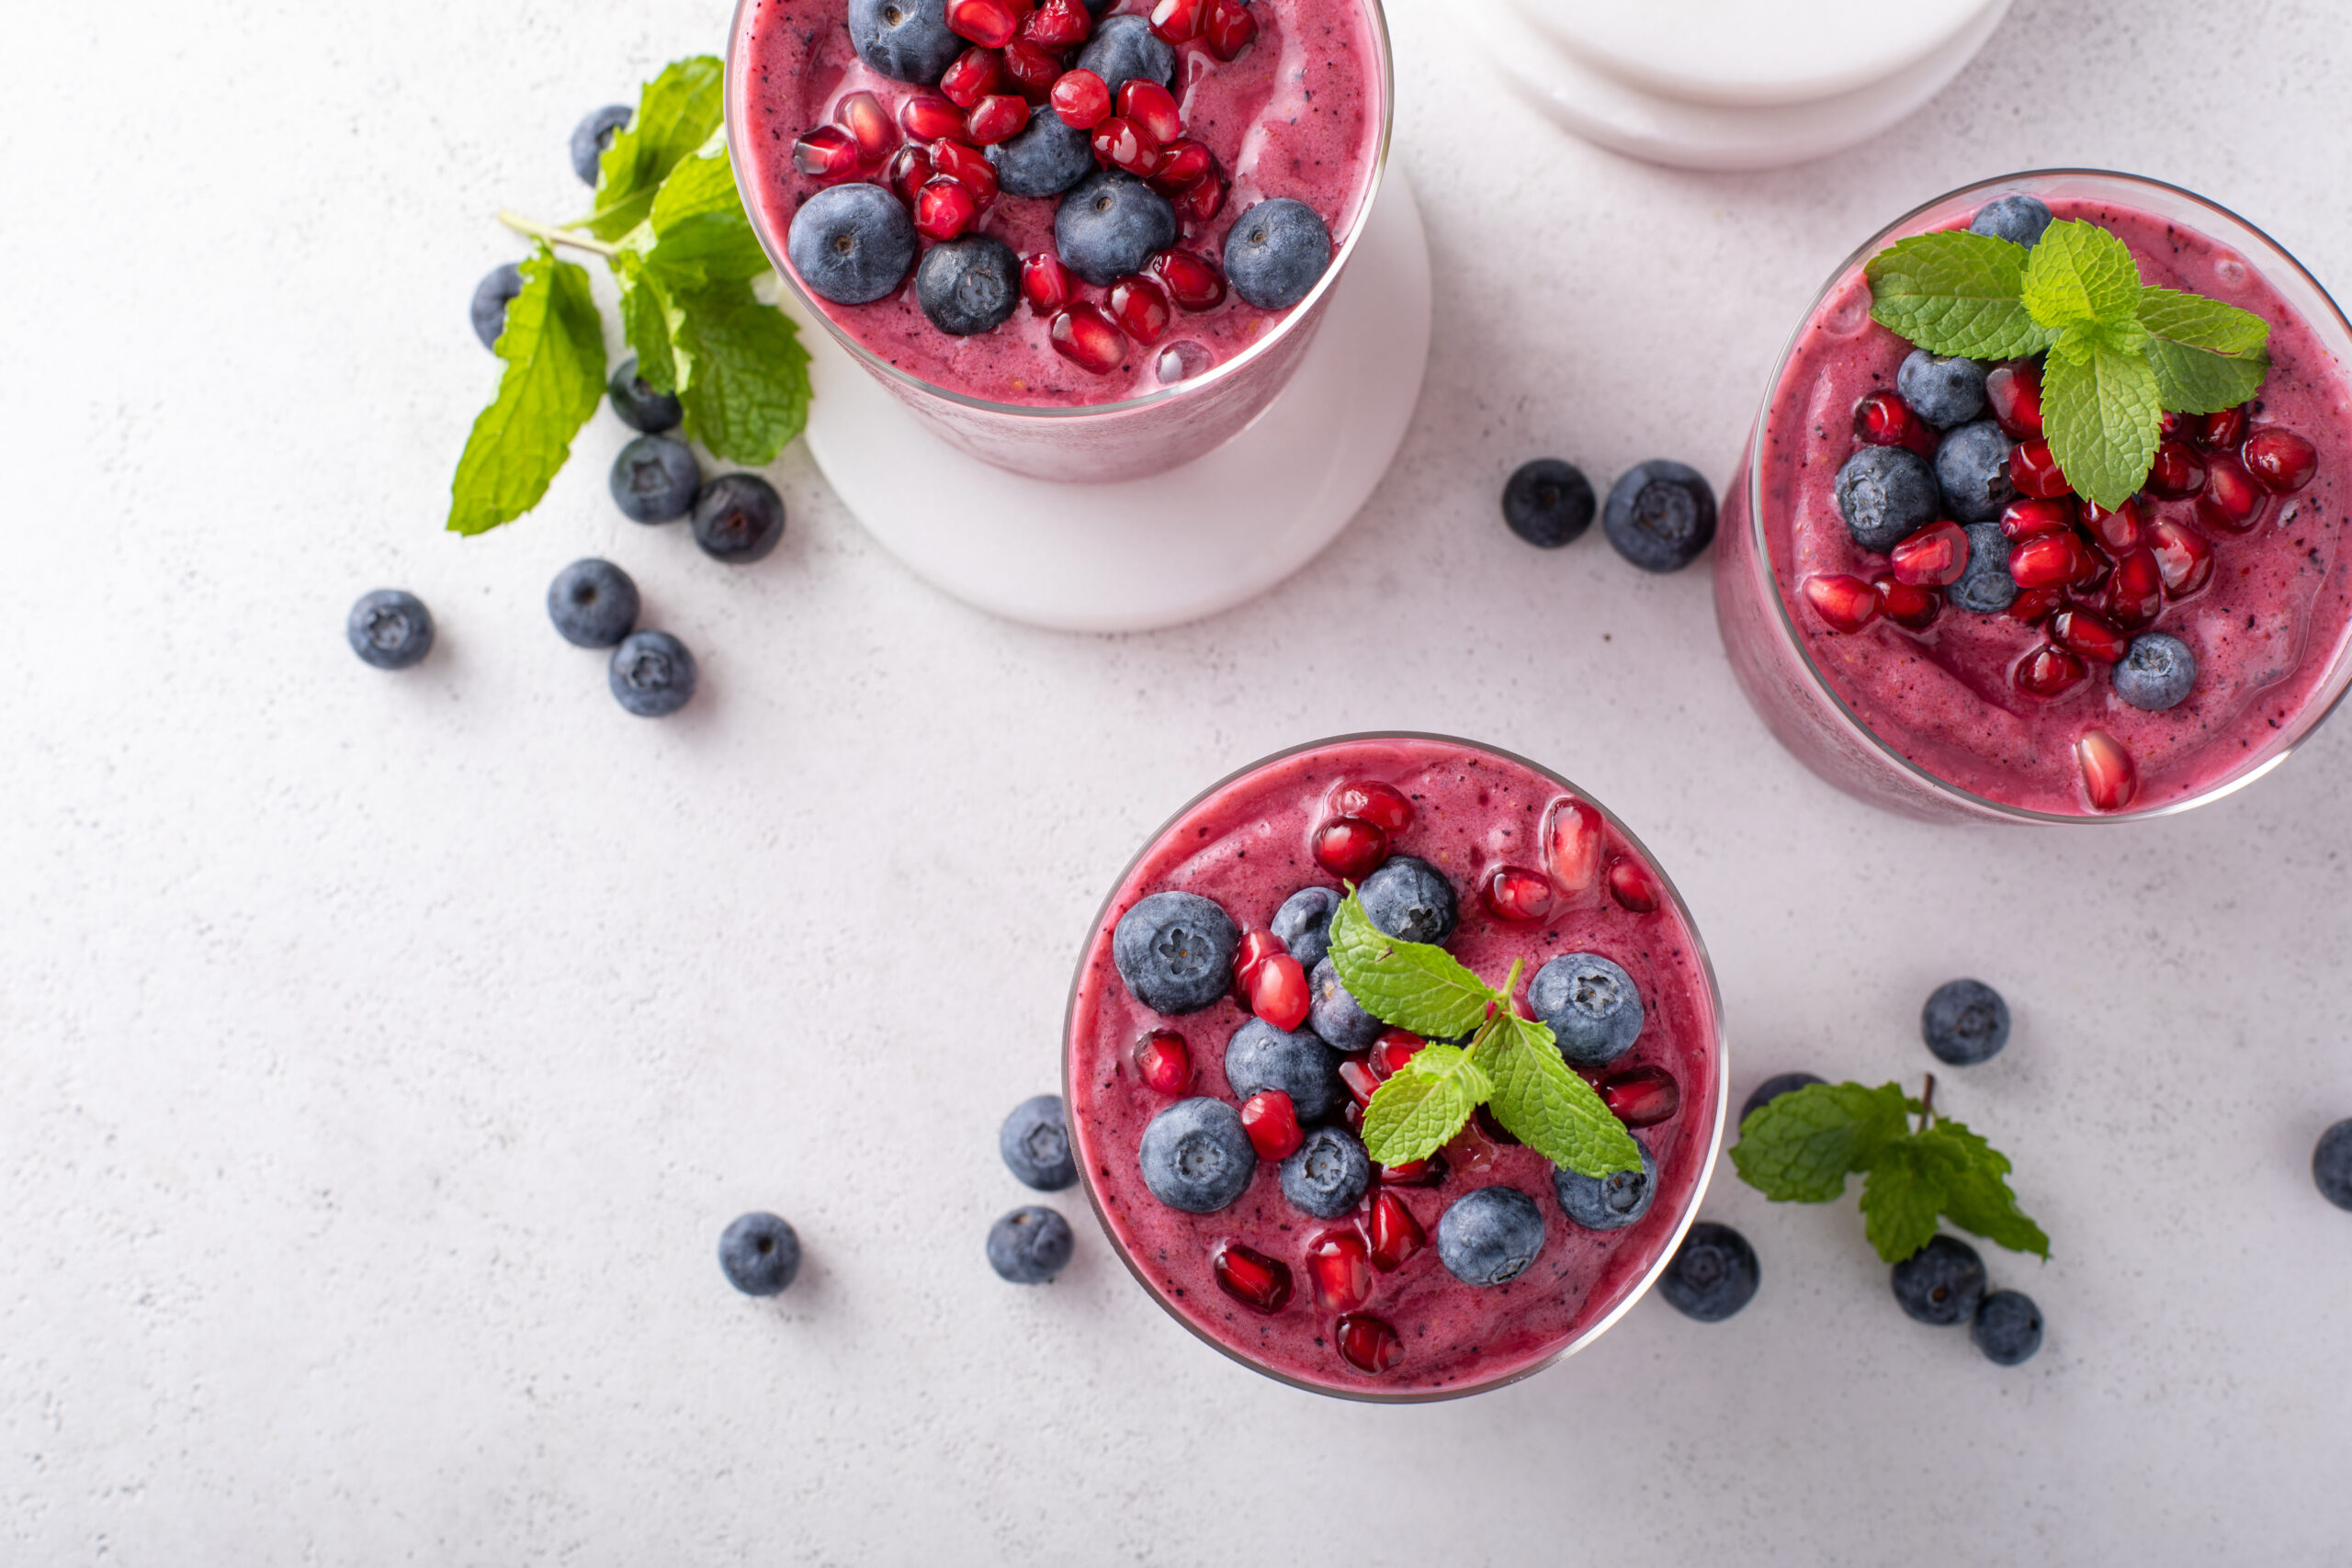 Looking for a delicious sweet treat the whole family will love? You have to try this Pomegranate Berry Smoothie recipe ASAP! CLICK HERE to make it! 